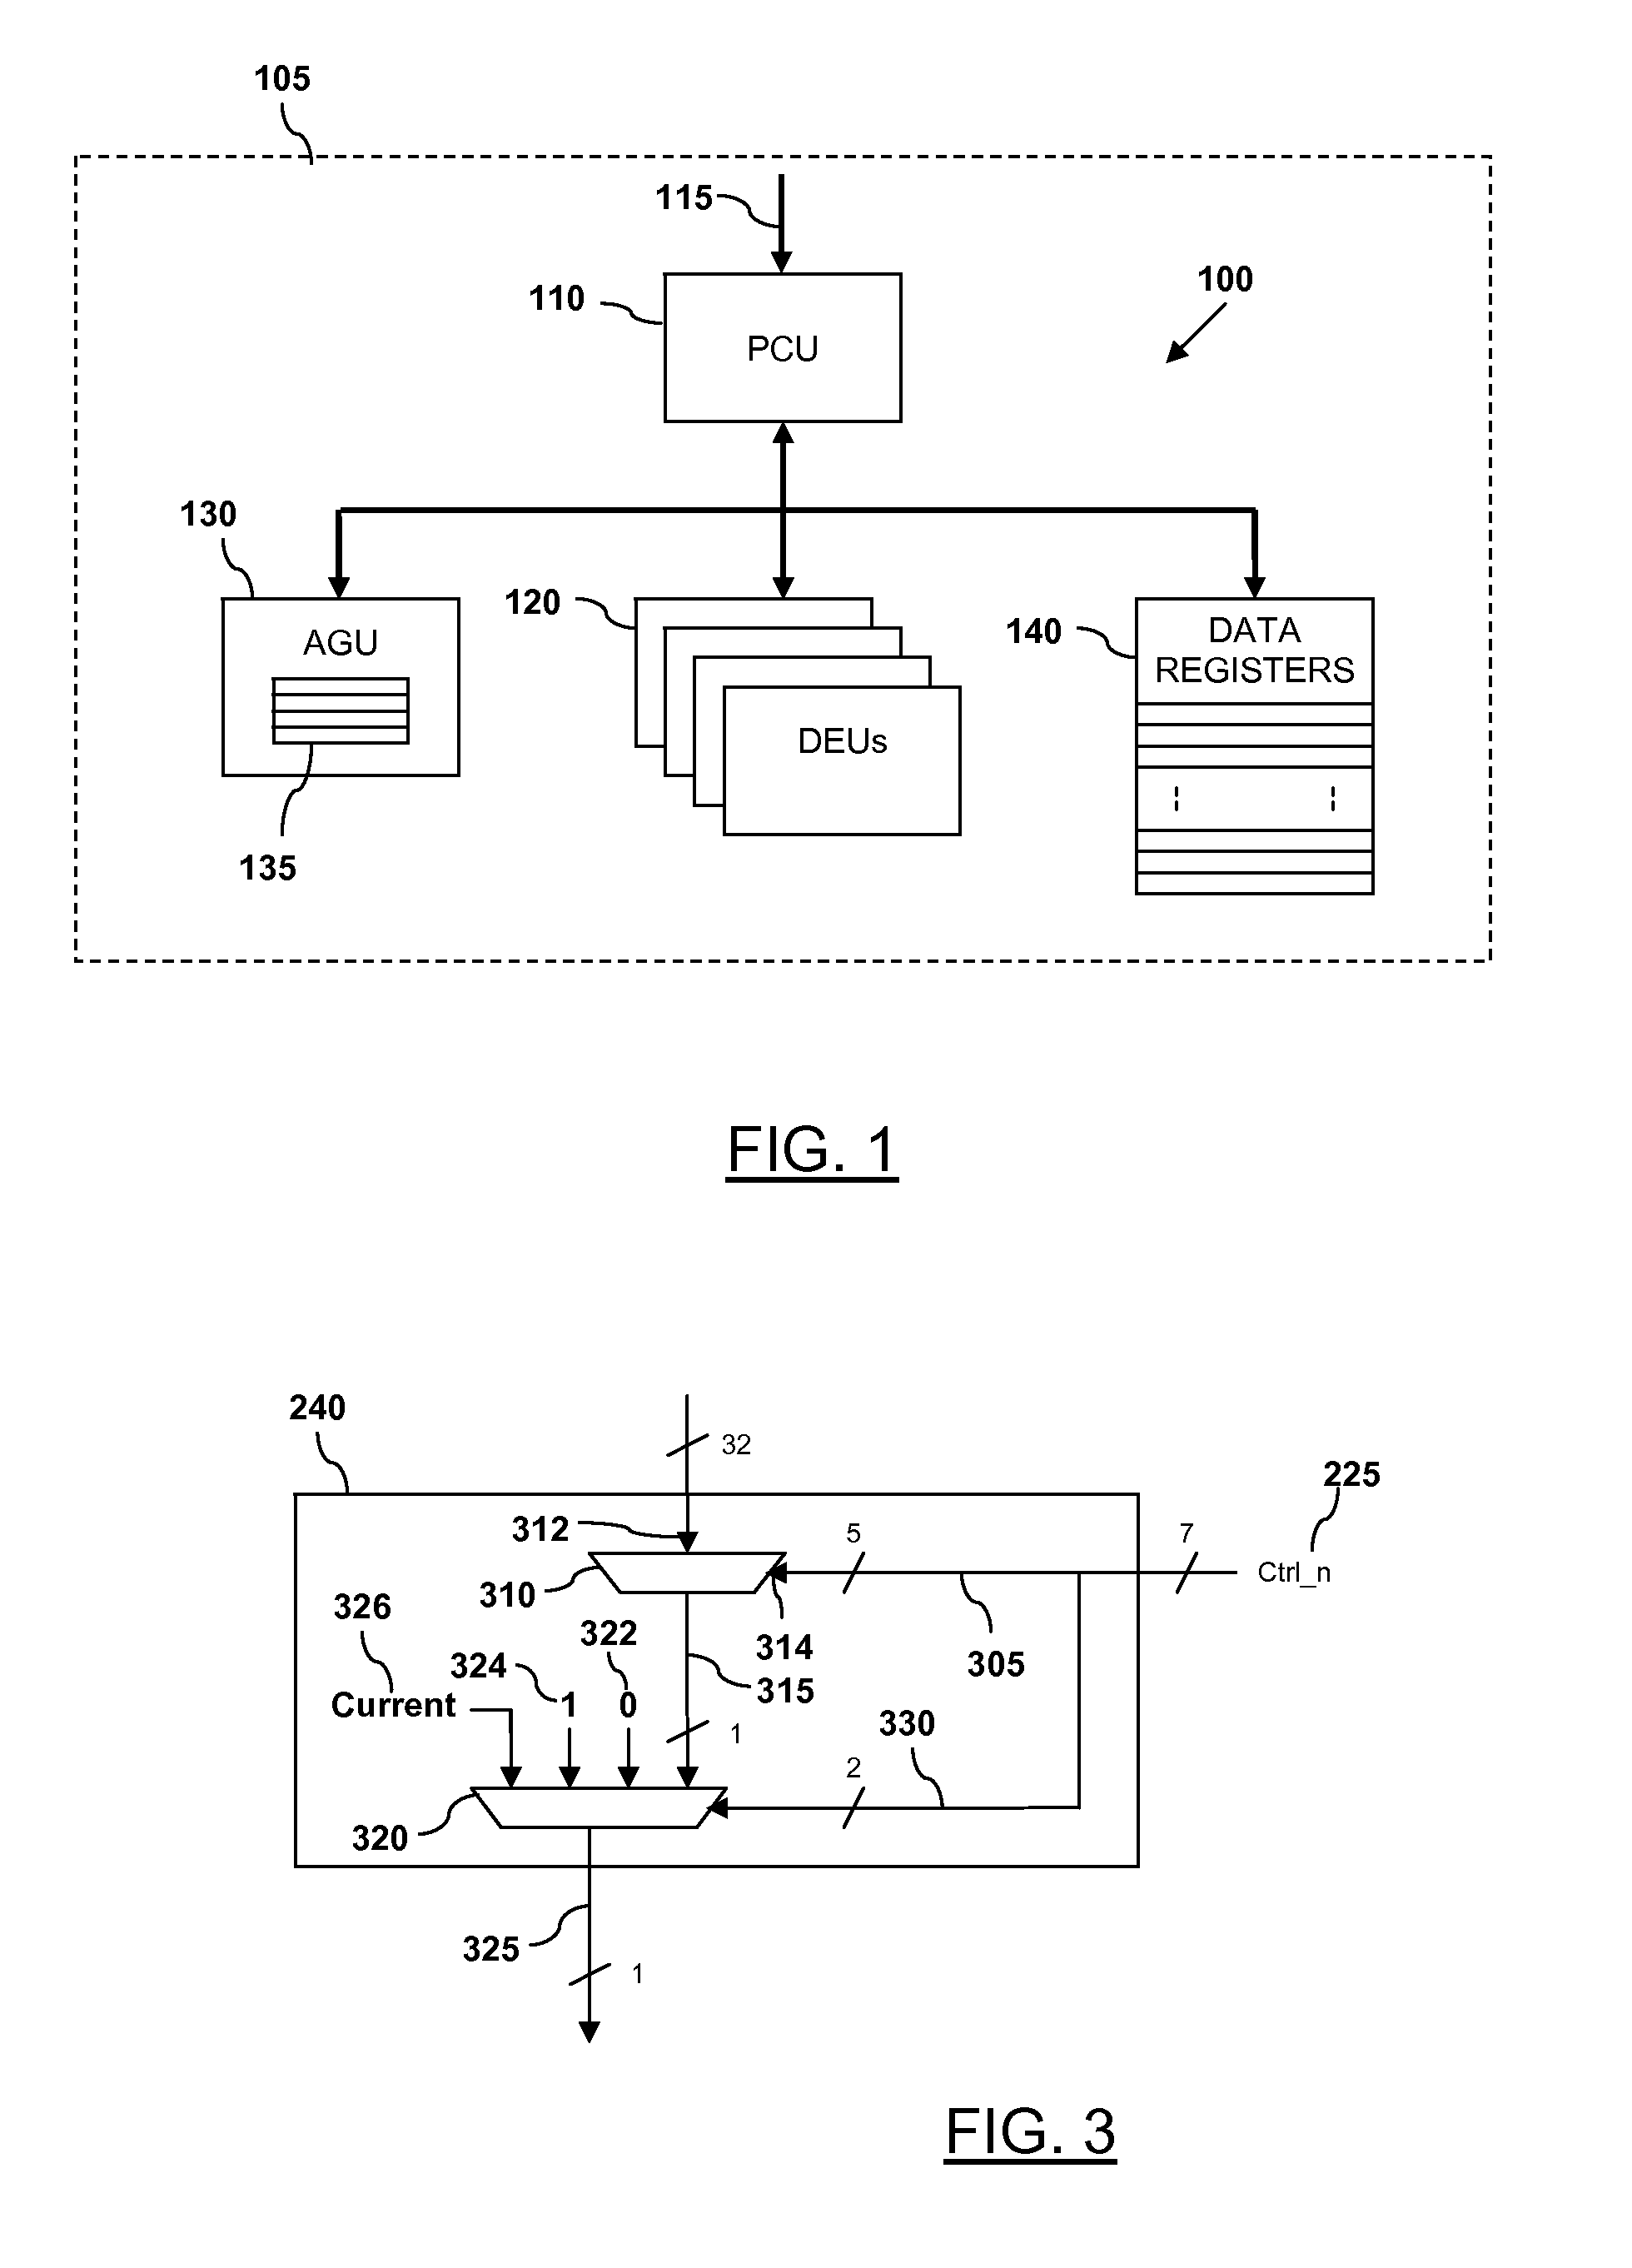 Integrated circuit device and methods of performing bit manipulation therefor